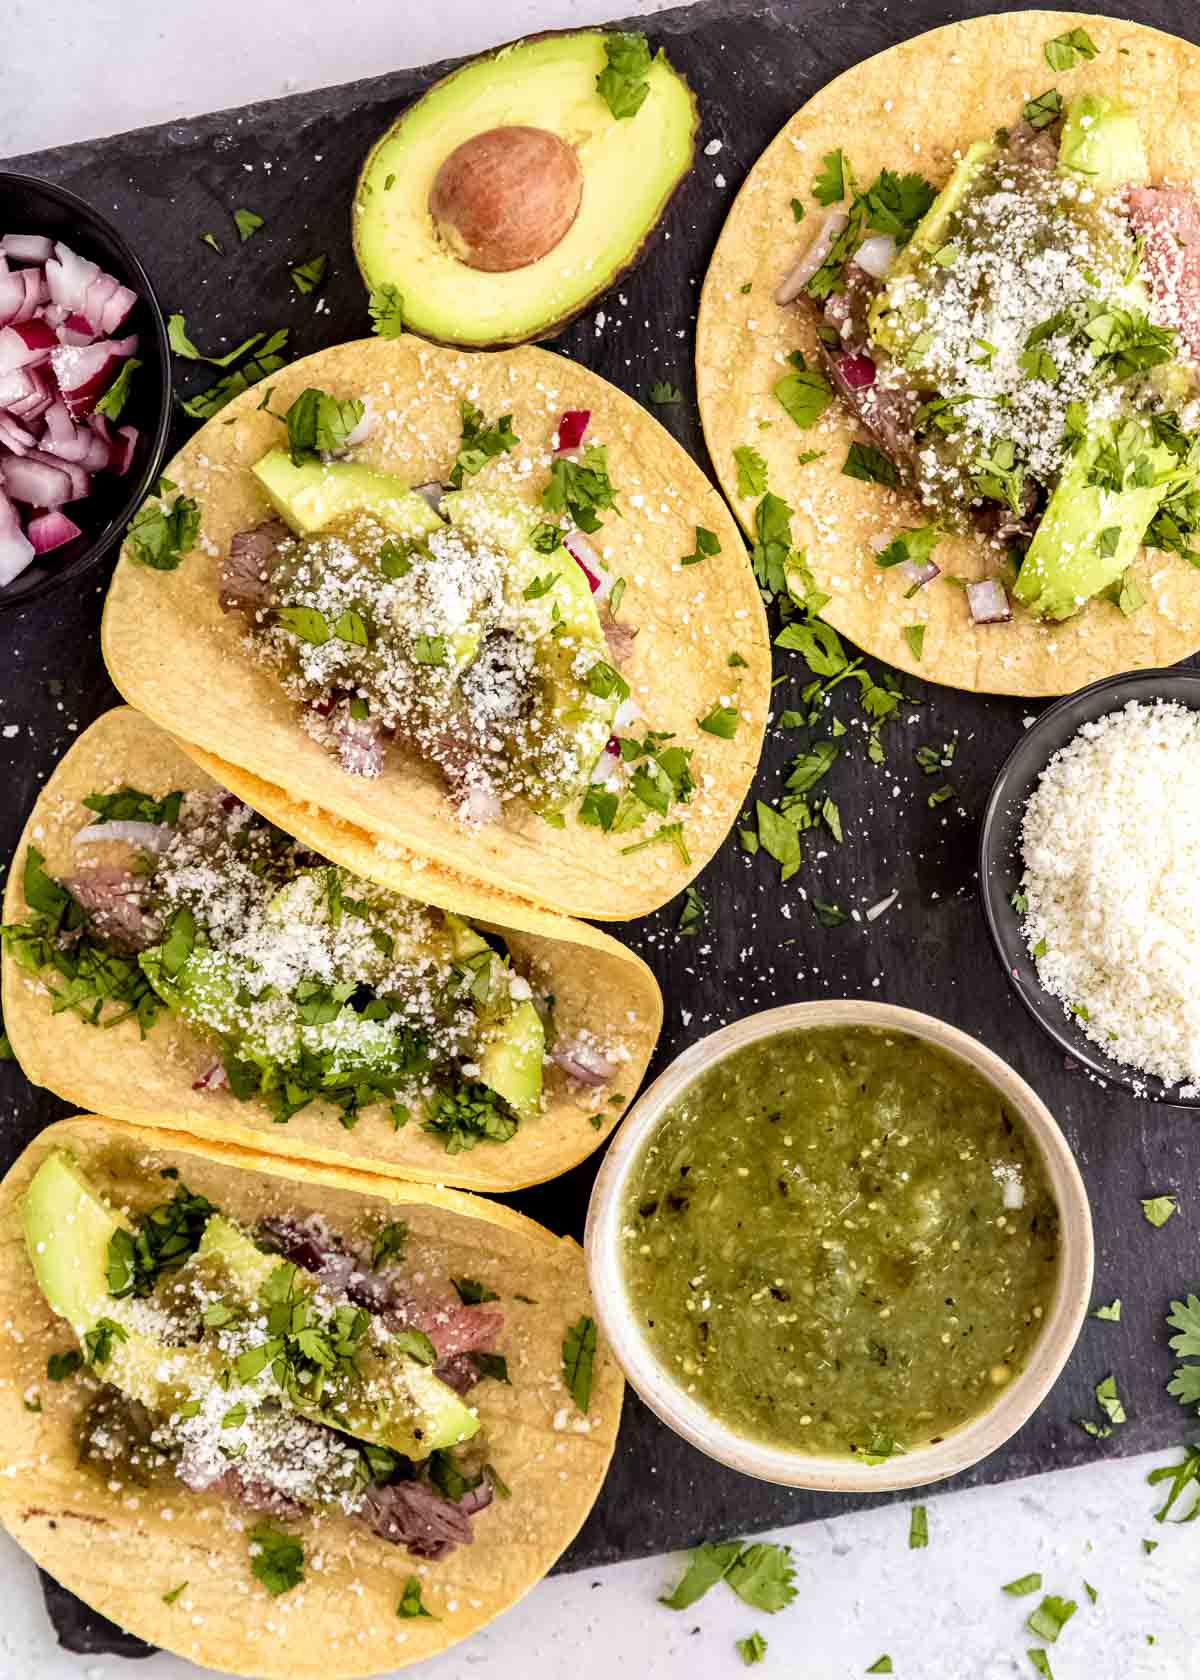 steak tacos with toppings on a board with salsa verde